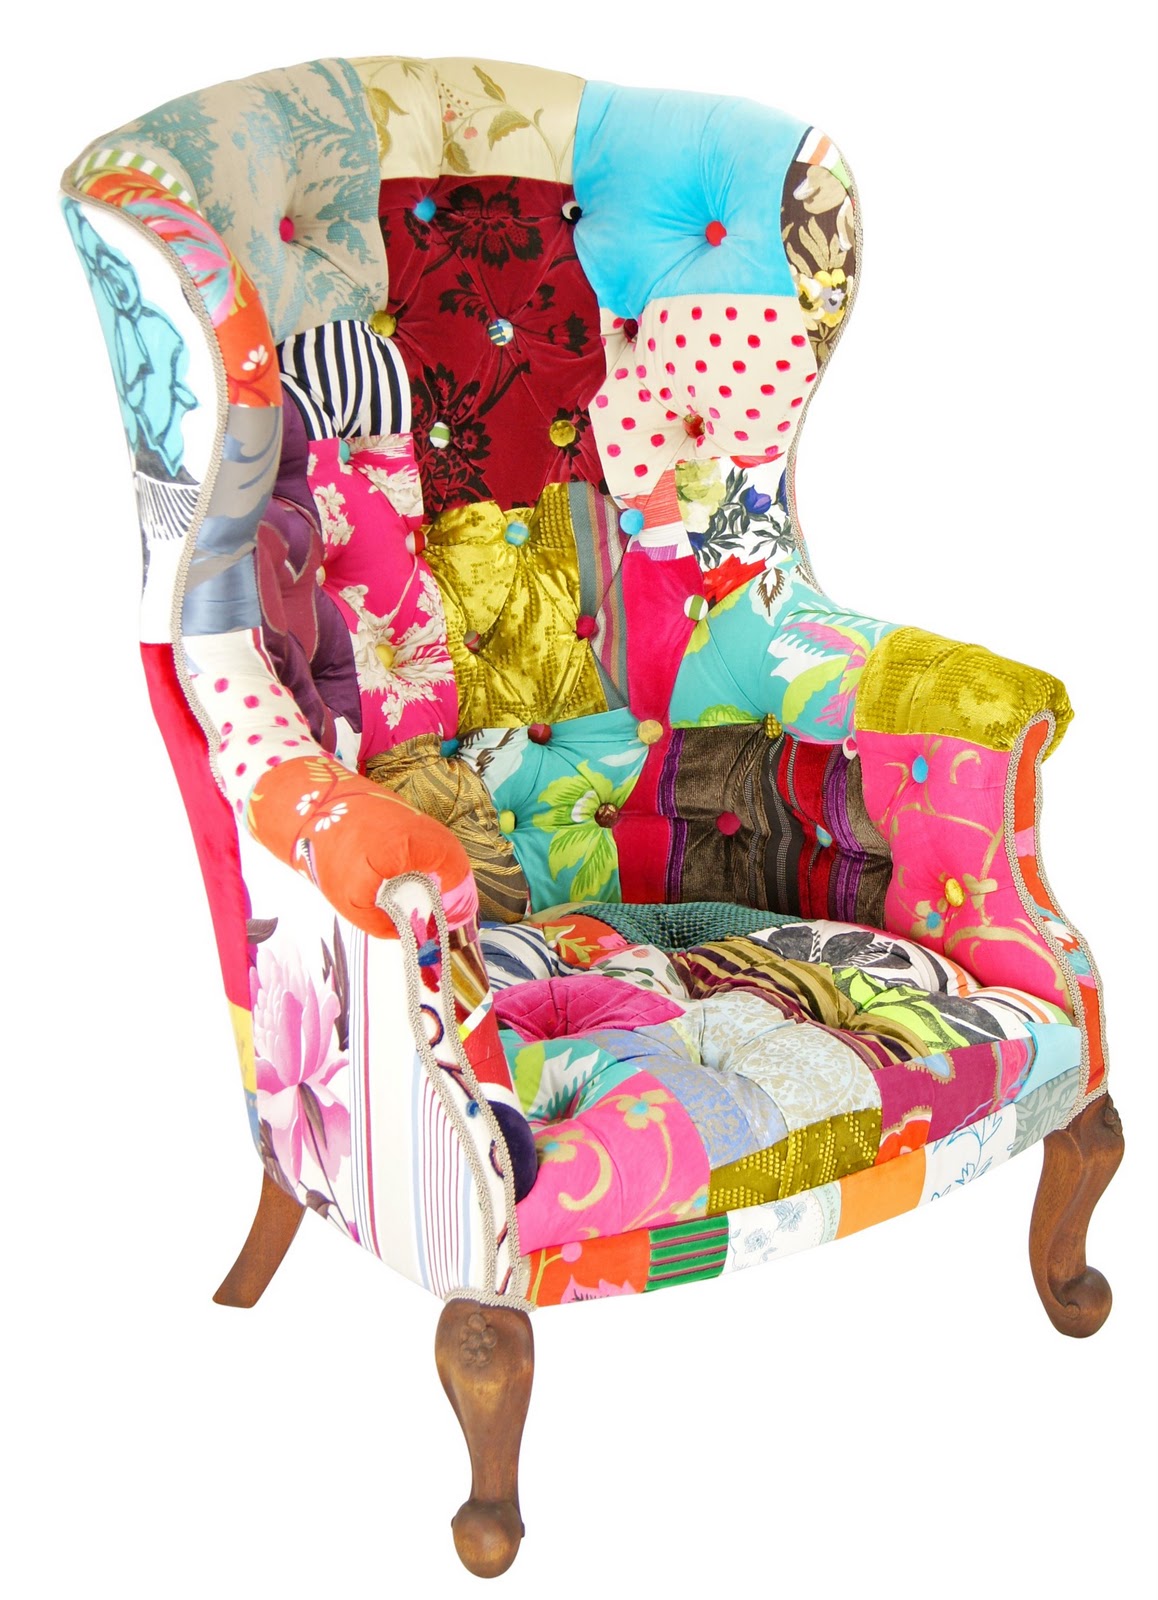 Patchwork Chairs By Kelly Swallow title=